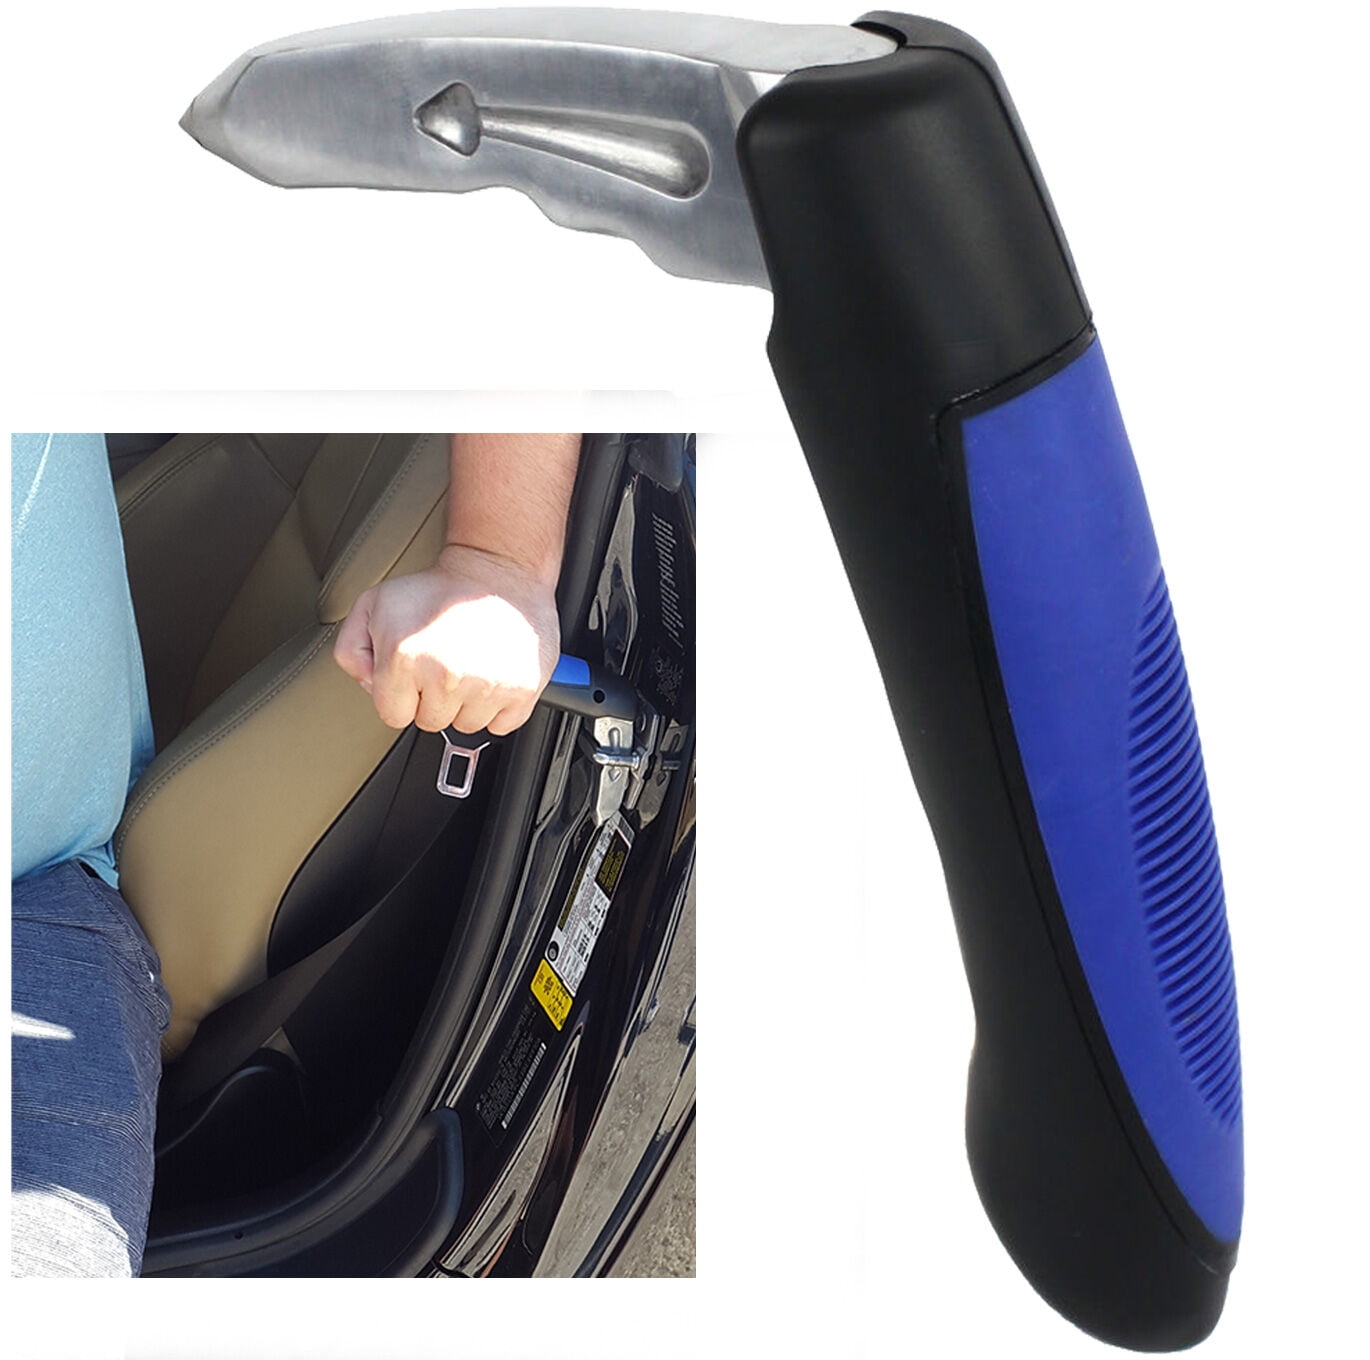 Car Door Automotive Handle Standing Aid Cane & Window Breaker - Safety  Assist For Elderly, Handicap Support, Mobility Transfer & Vehicle Exit 